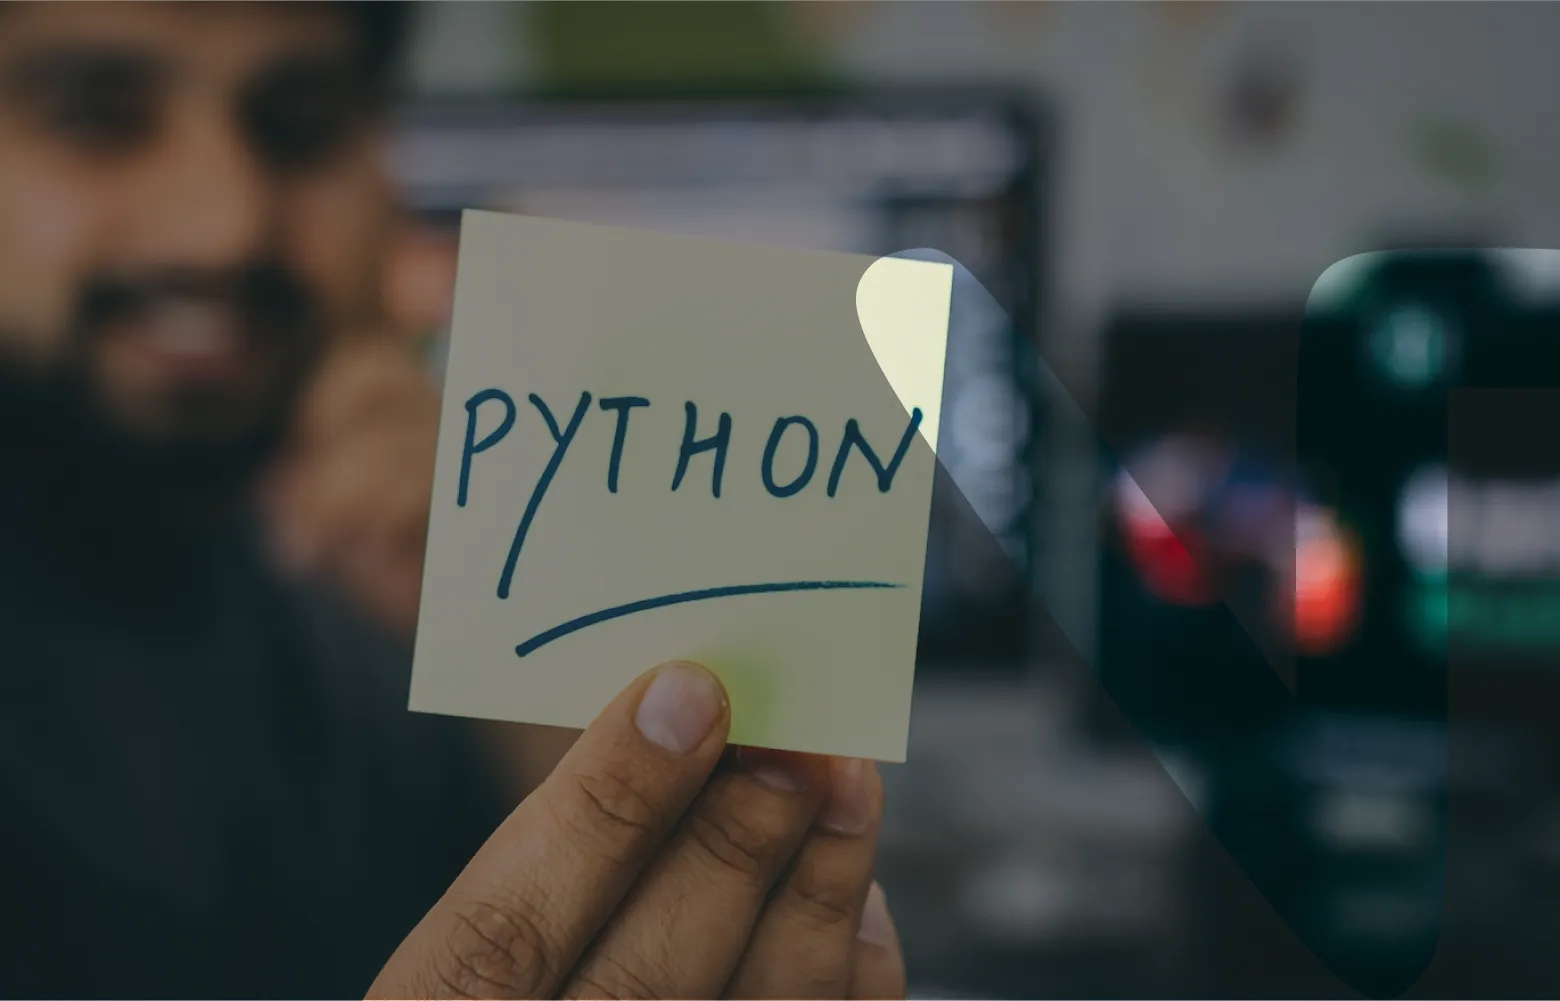 Why is Python Such a Popular Choice Among Data Scientists